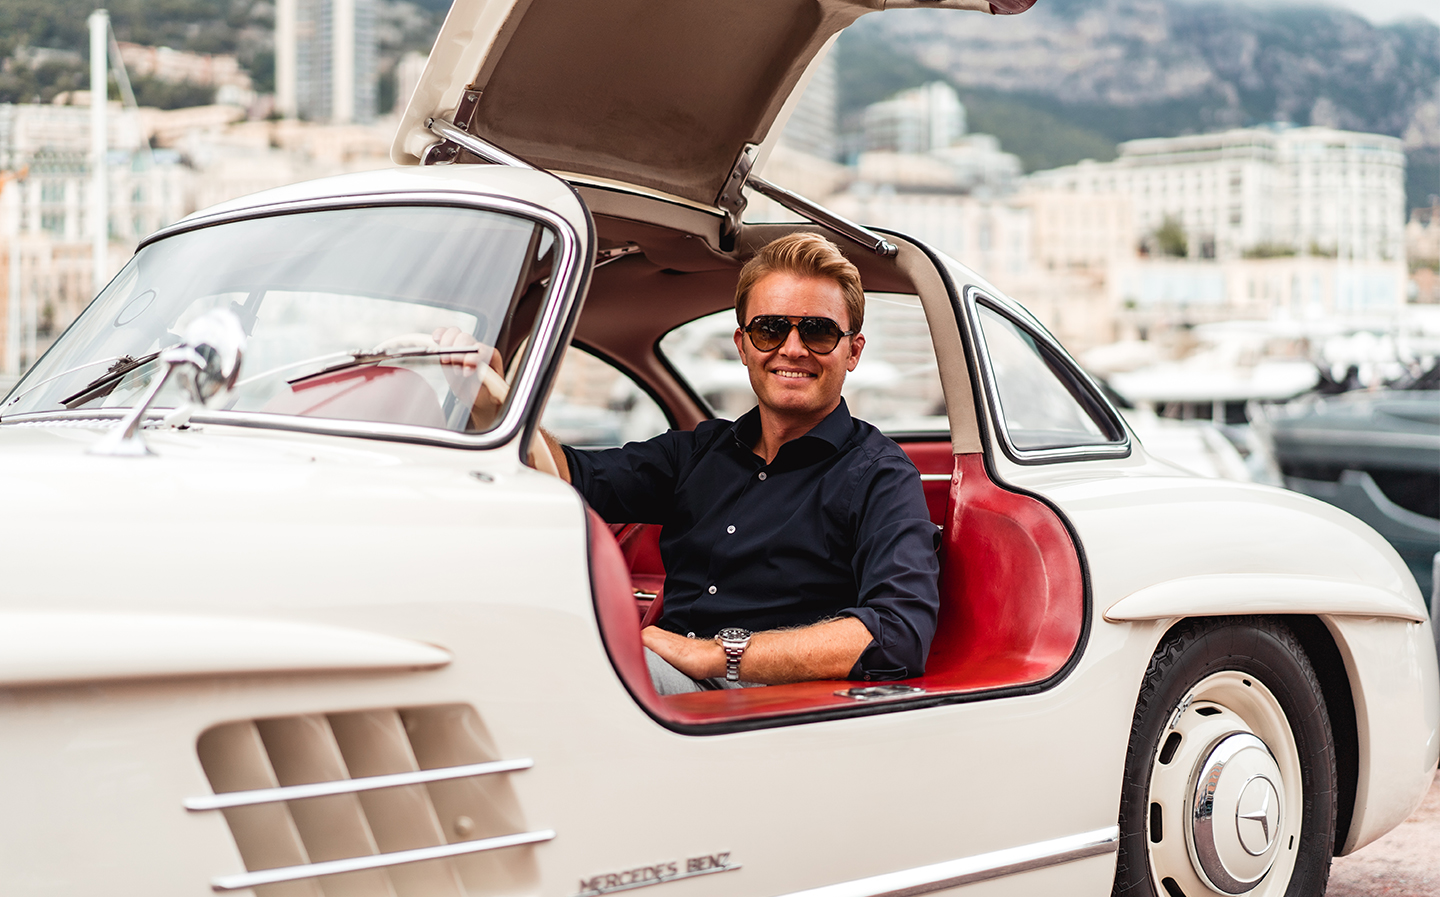 Drivin' with Nico Rosberg rally 2019 - feature by Times Luxx's David Green for Driving.co.uk - Nico Rosberg in his 300 SL Mercedes